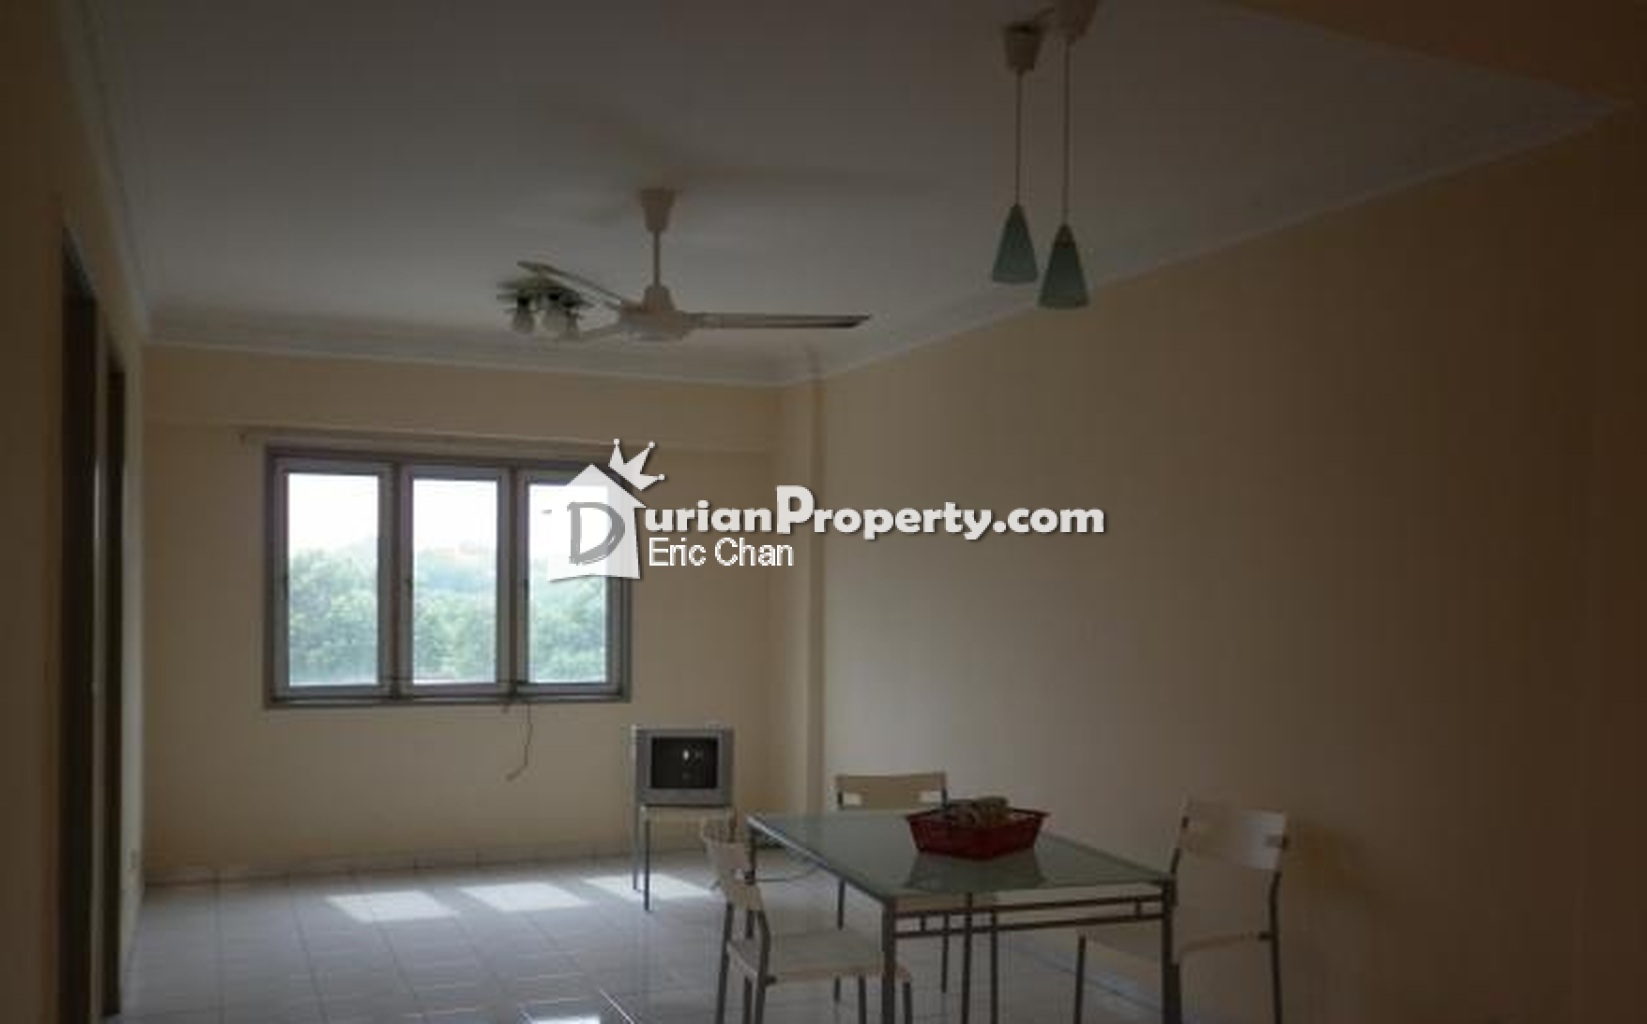 Apartment For Sale At Sri Endah Apartment Sri Petaling For Rm 160 000 By Eric Chan Durianproperty